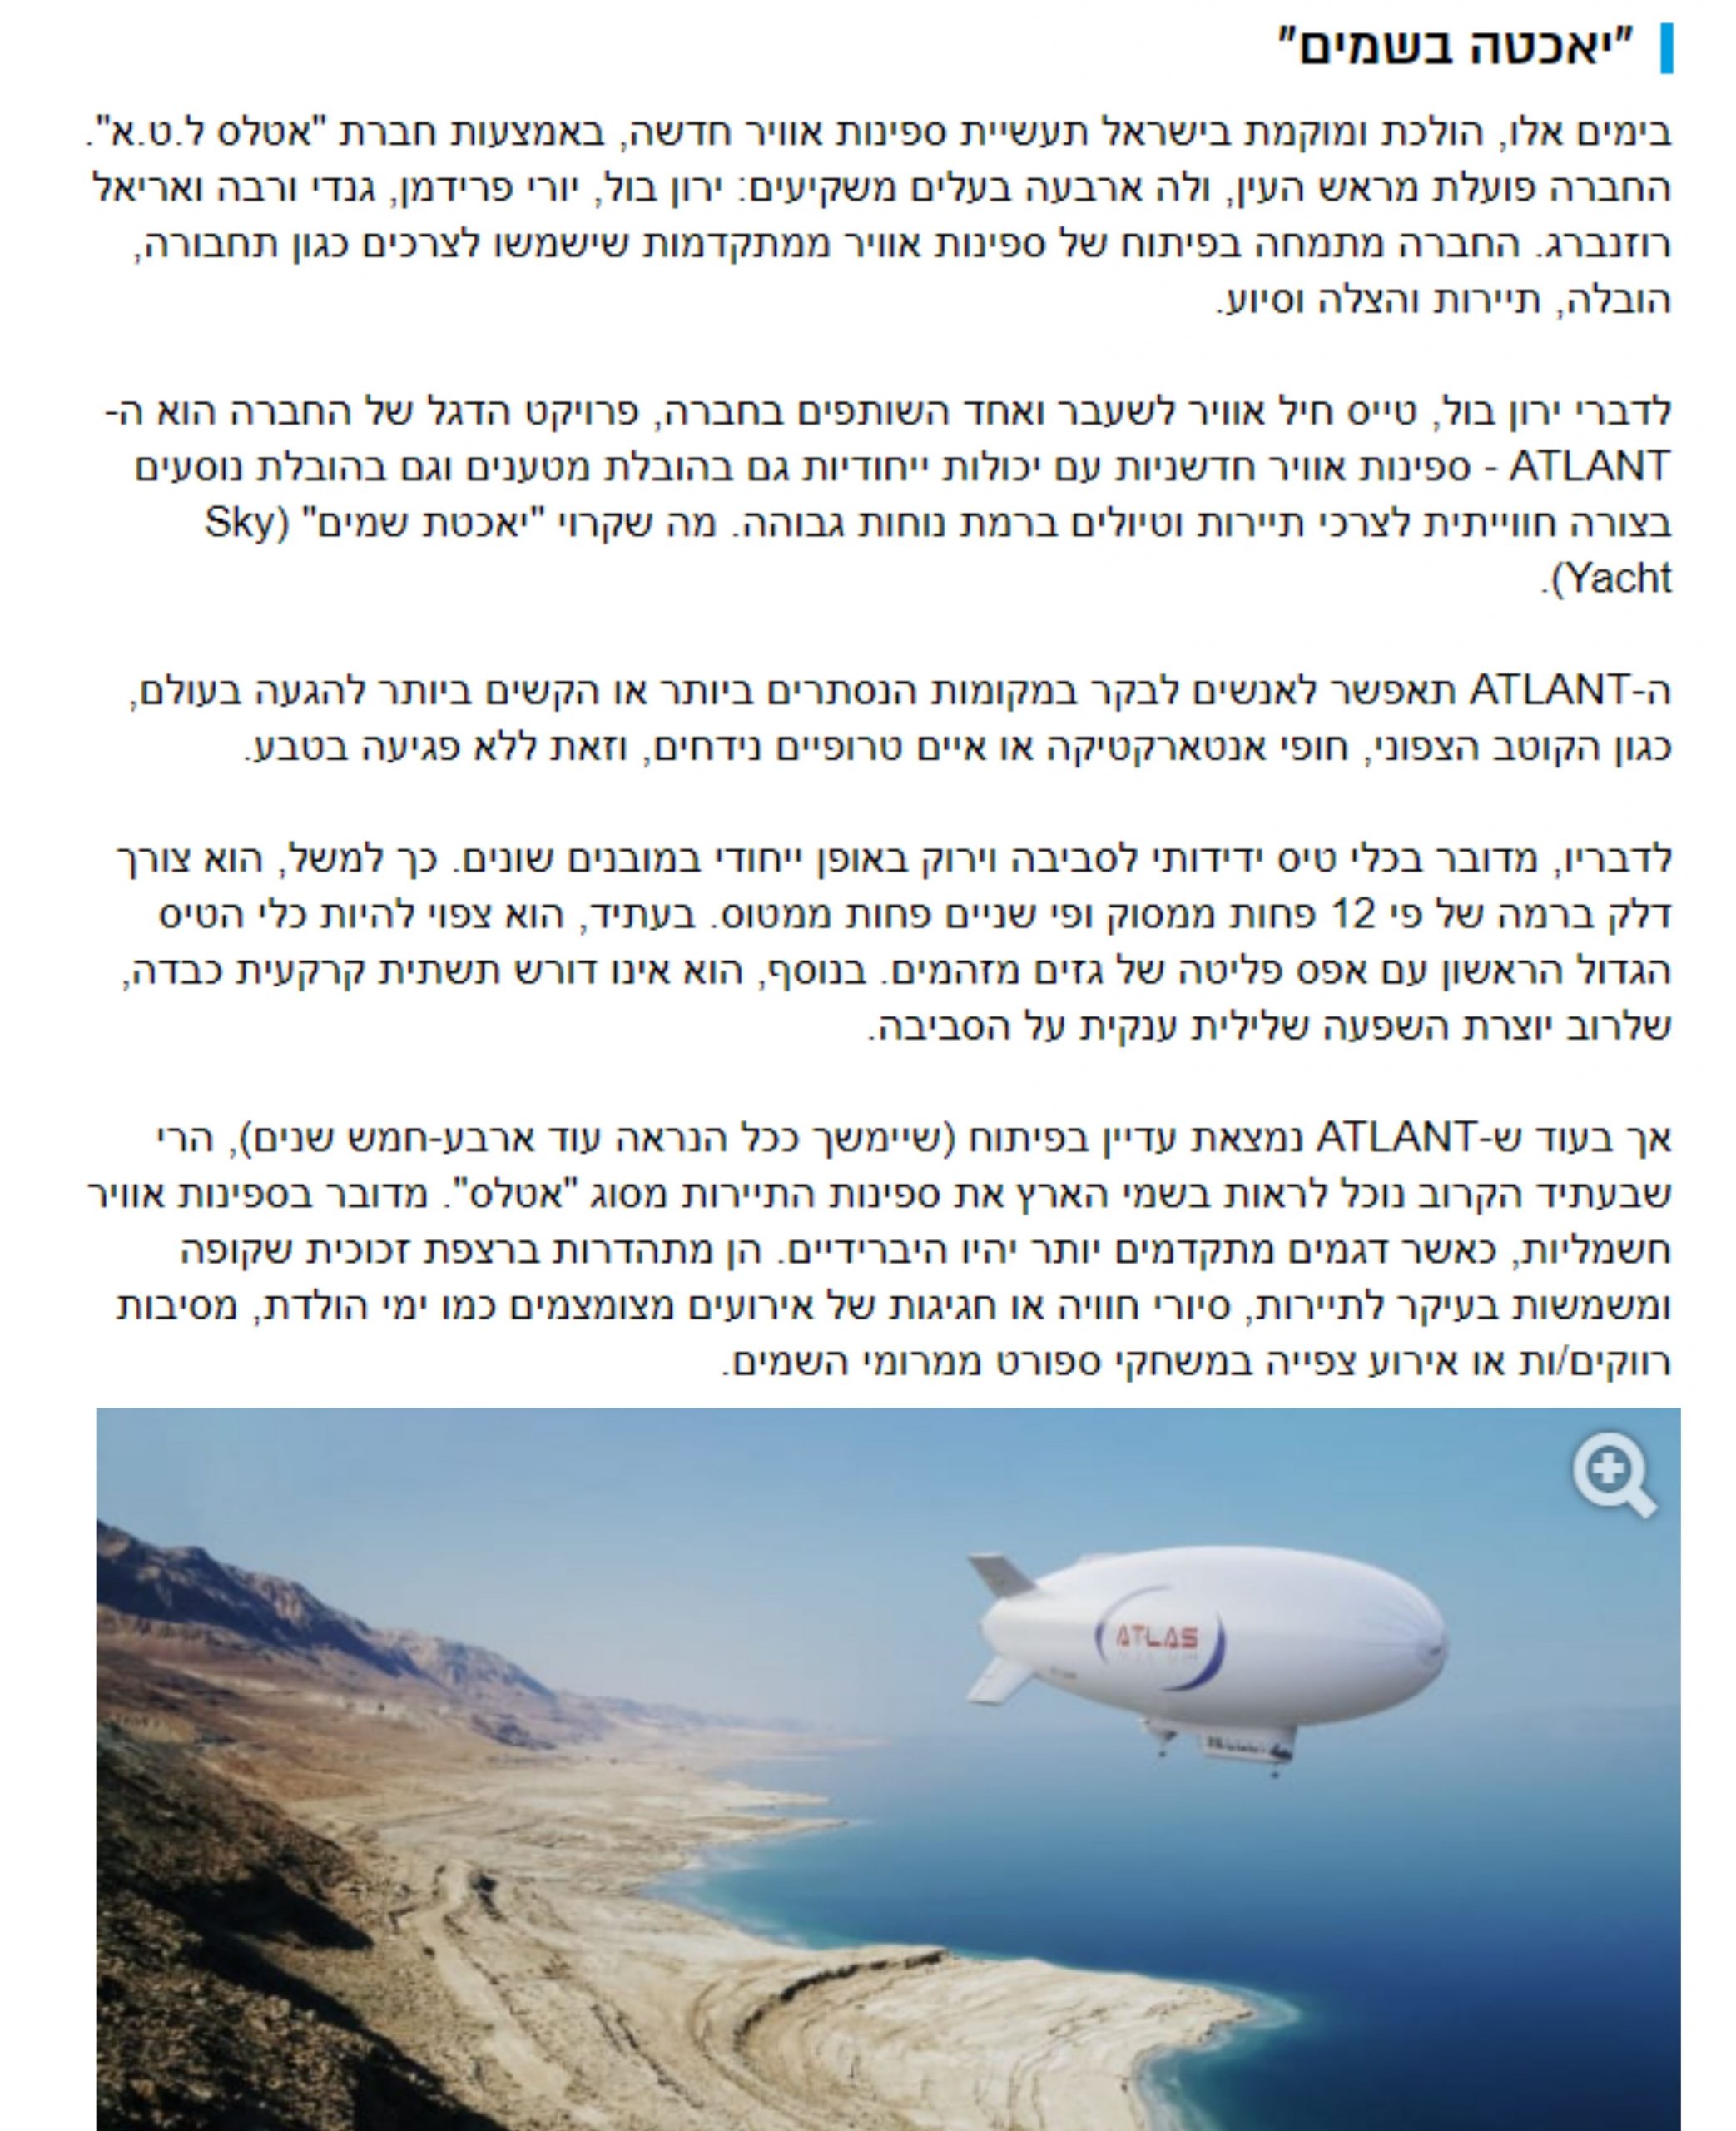 Israeli Ambition: The company that wants to conquer the sky with airships